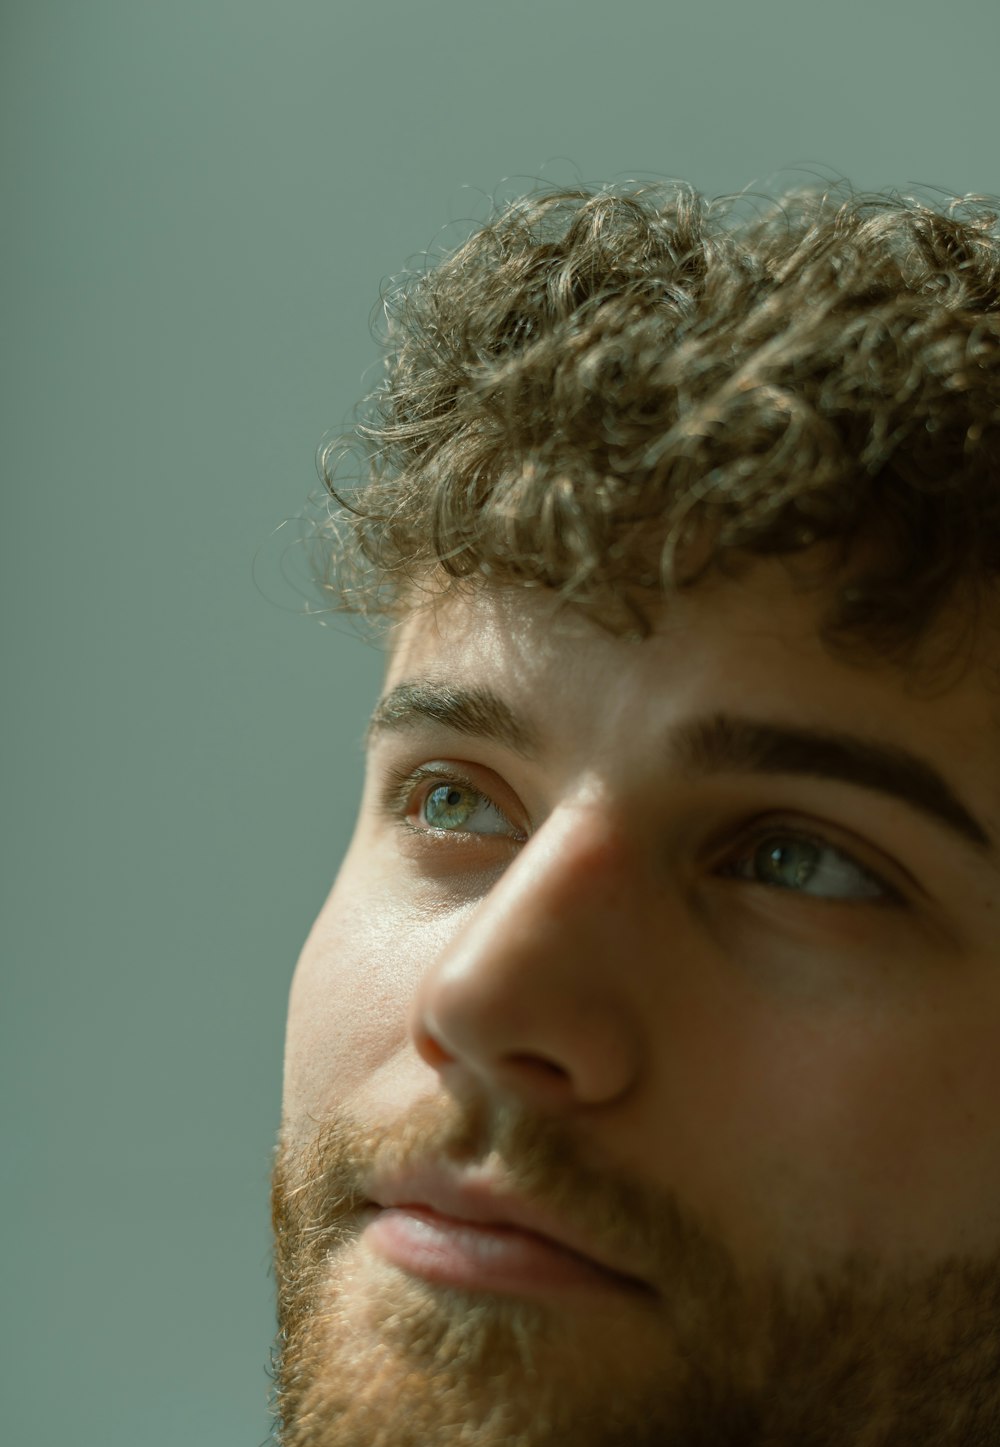 a close up of a man with curly hair